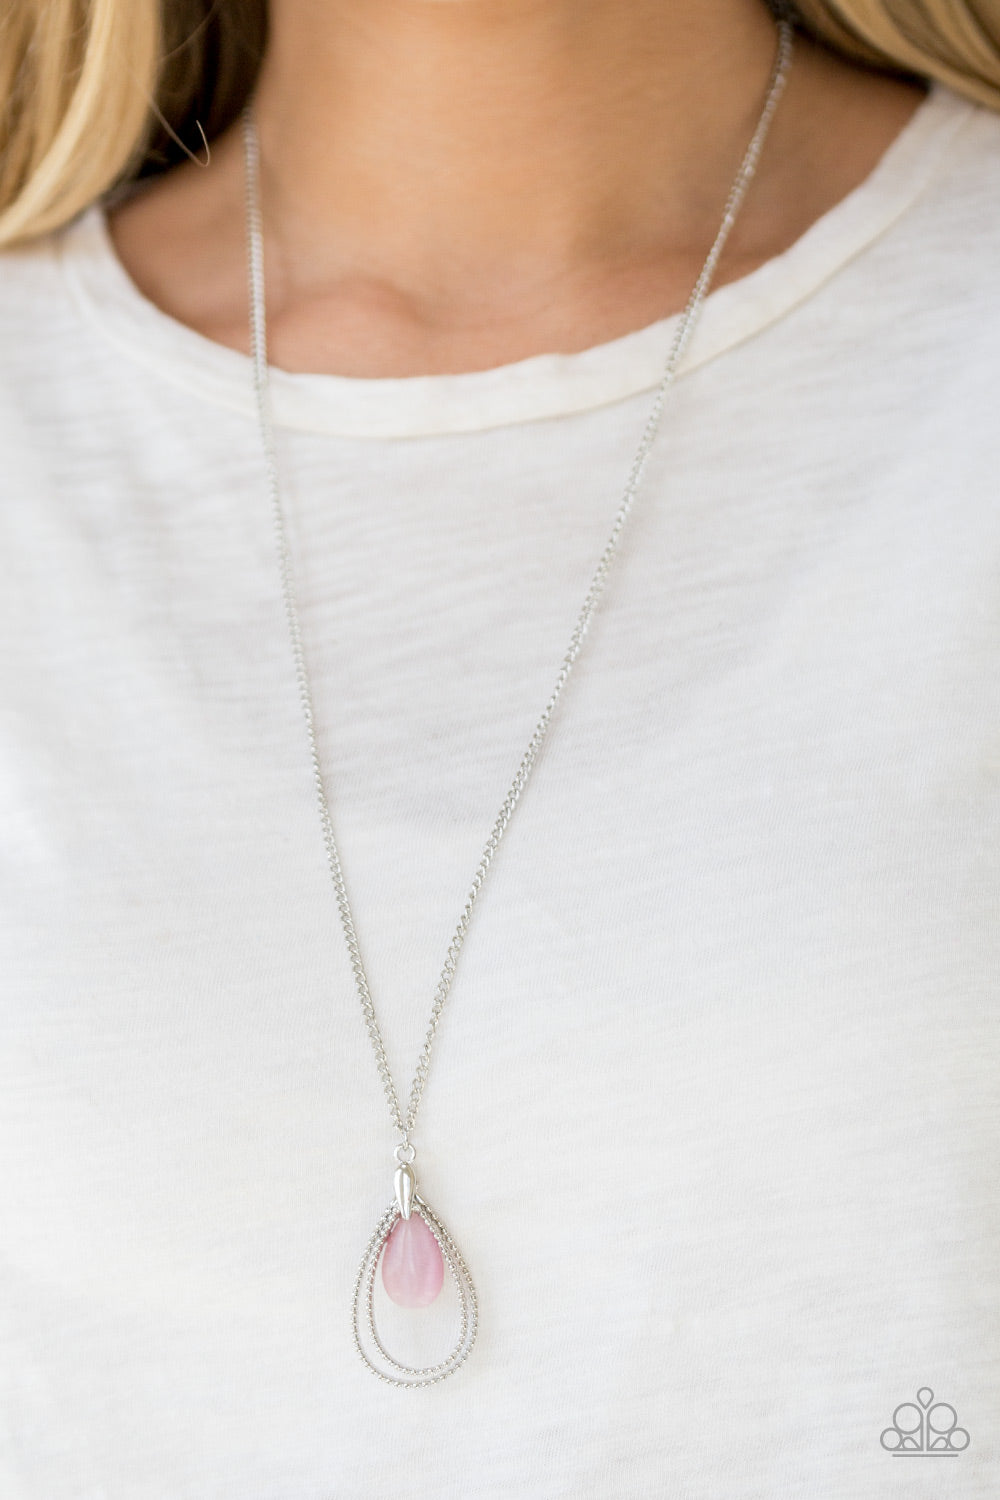 TREARDROP TRANQUILITY - PINK NECKLACE